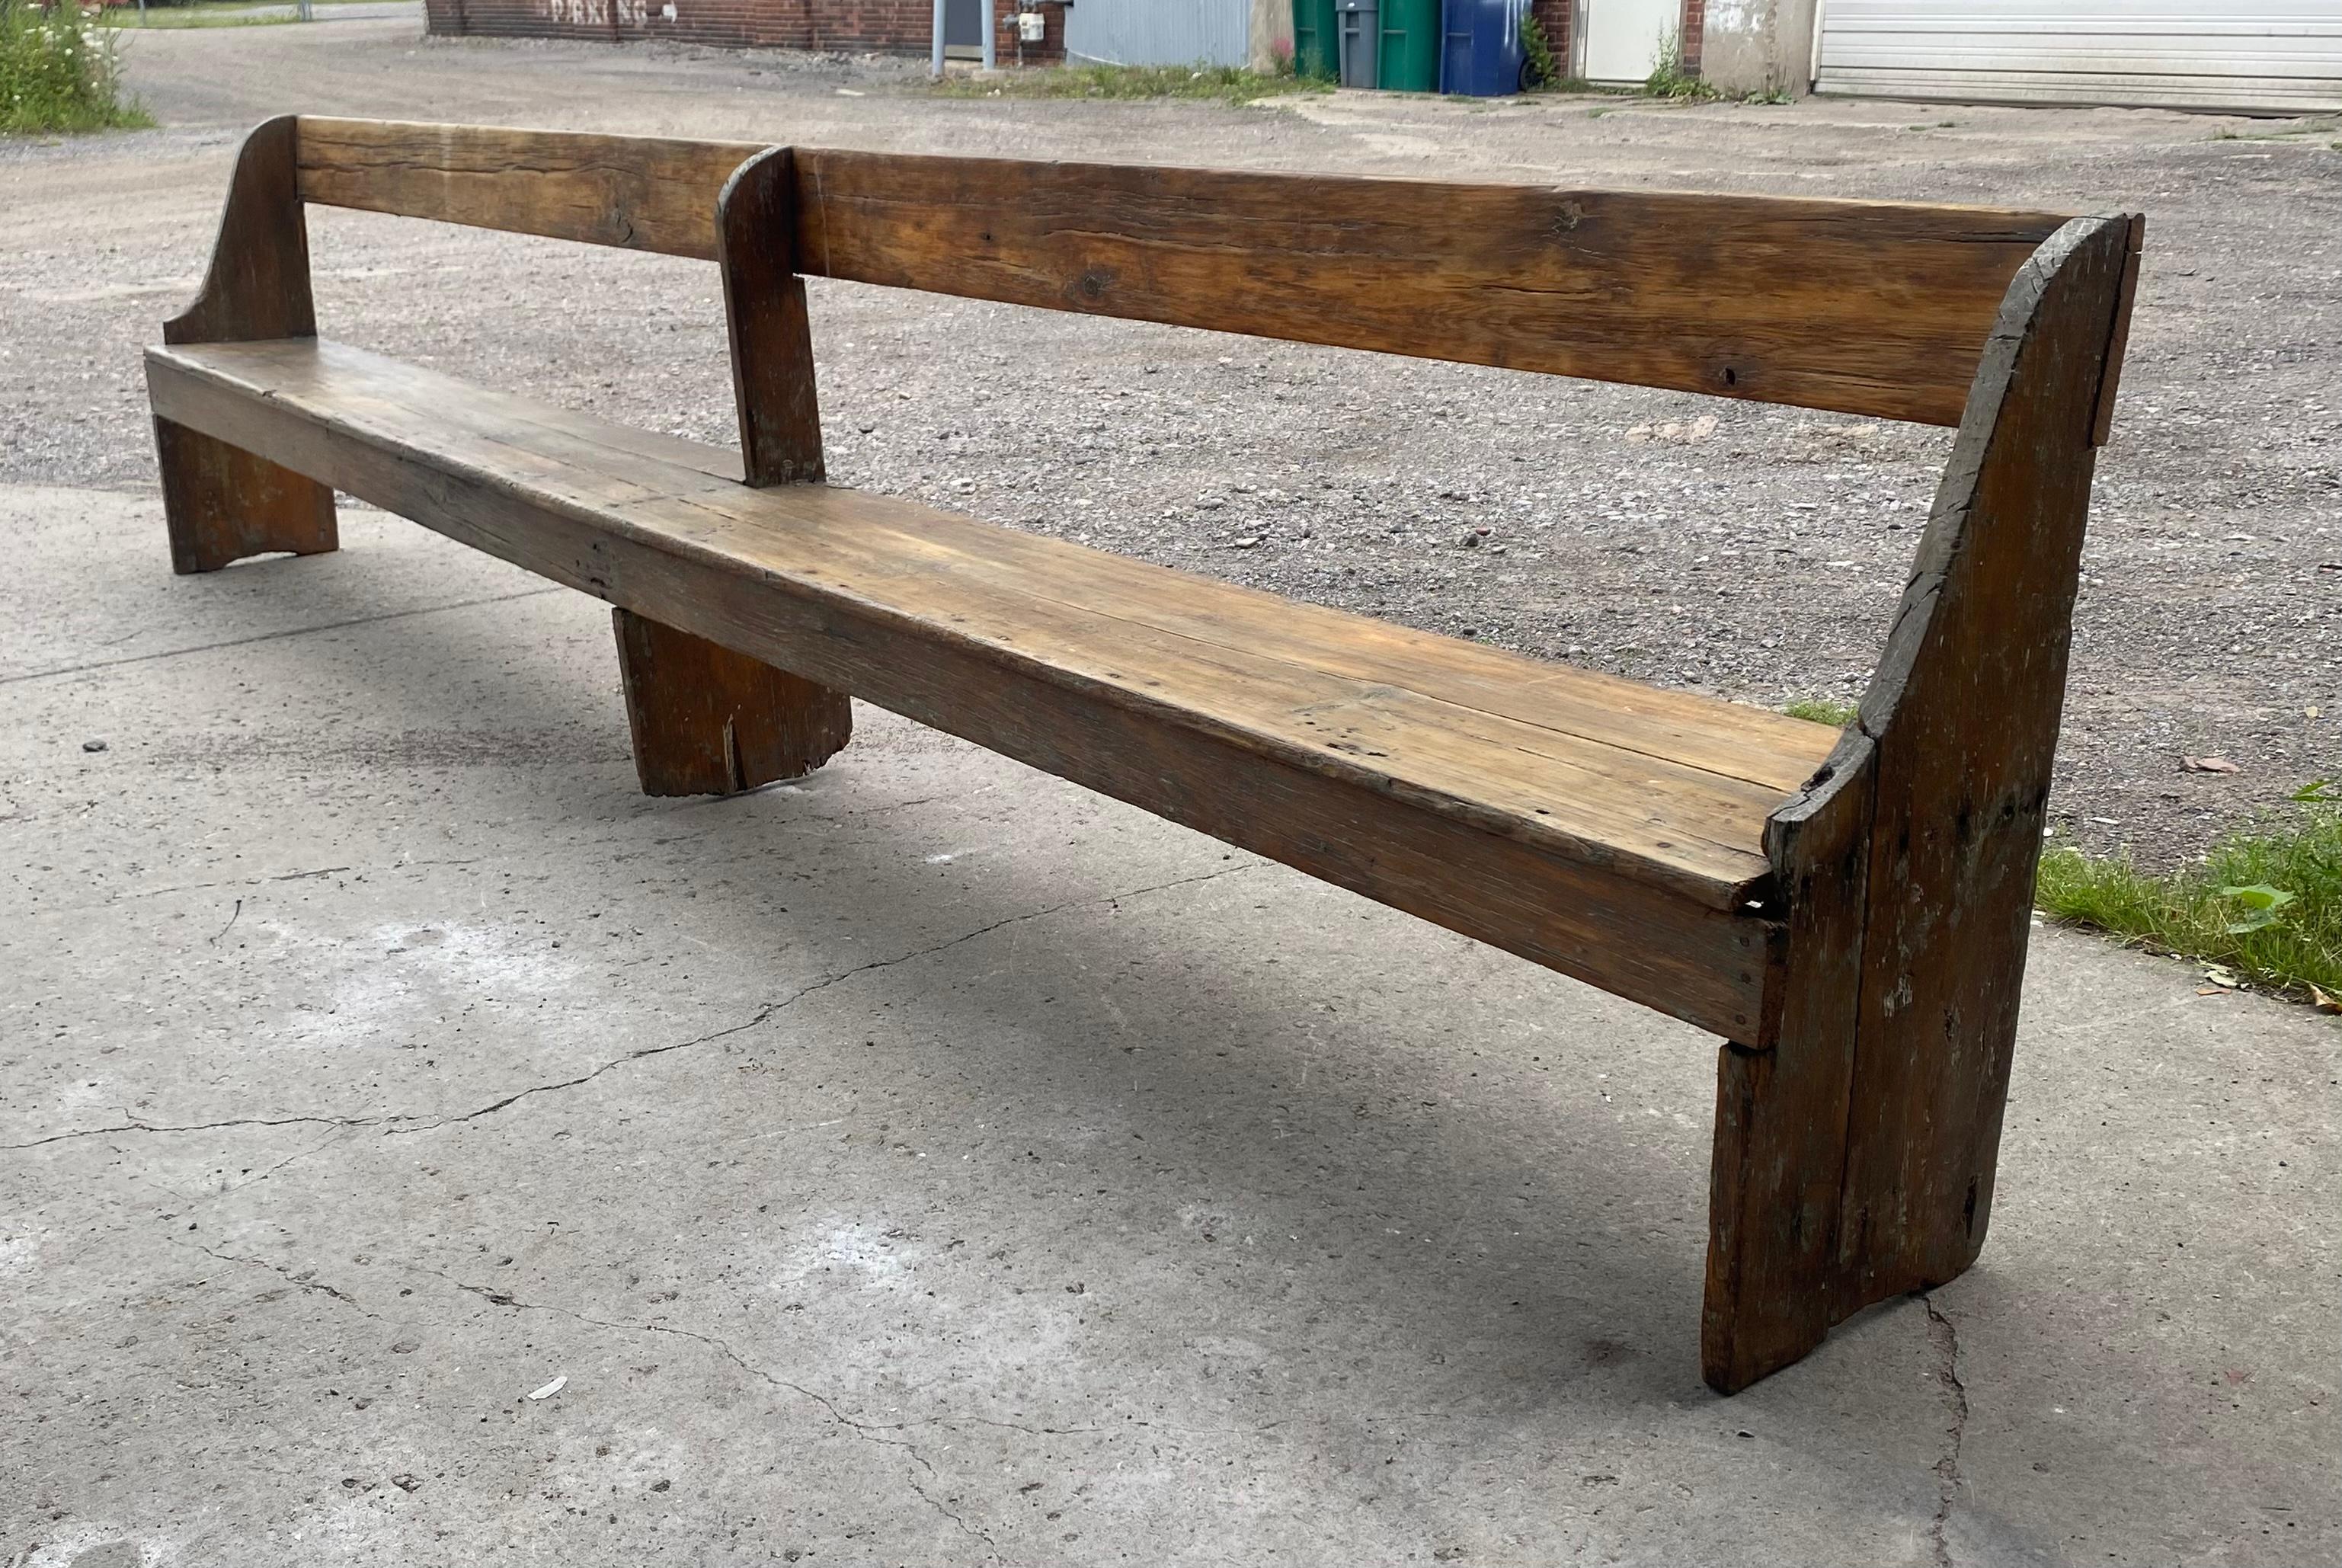 Extra long 19th Century single plank primitive bench, over 11 foot long. 1